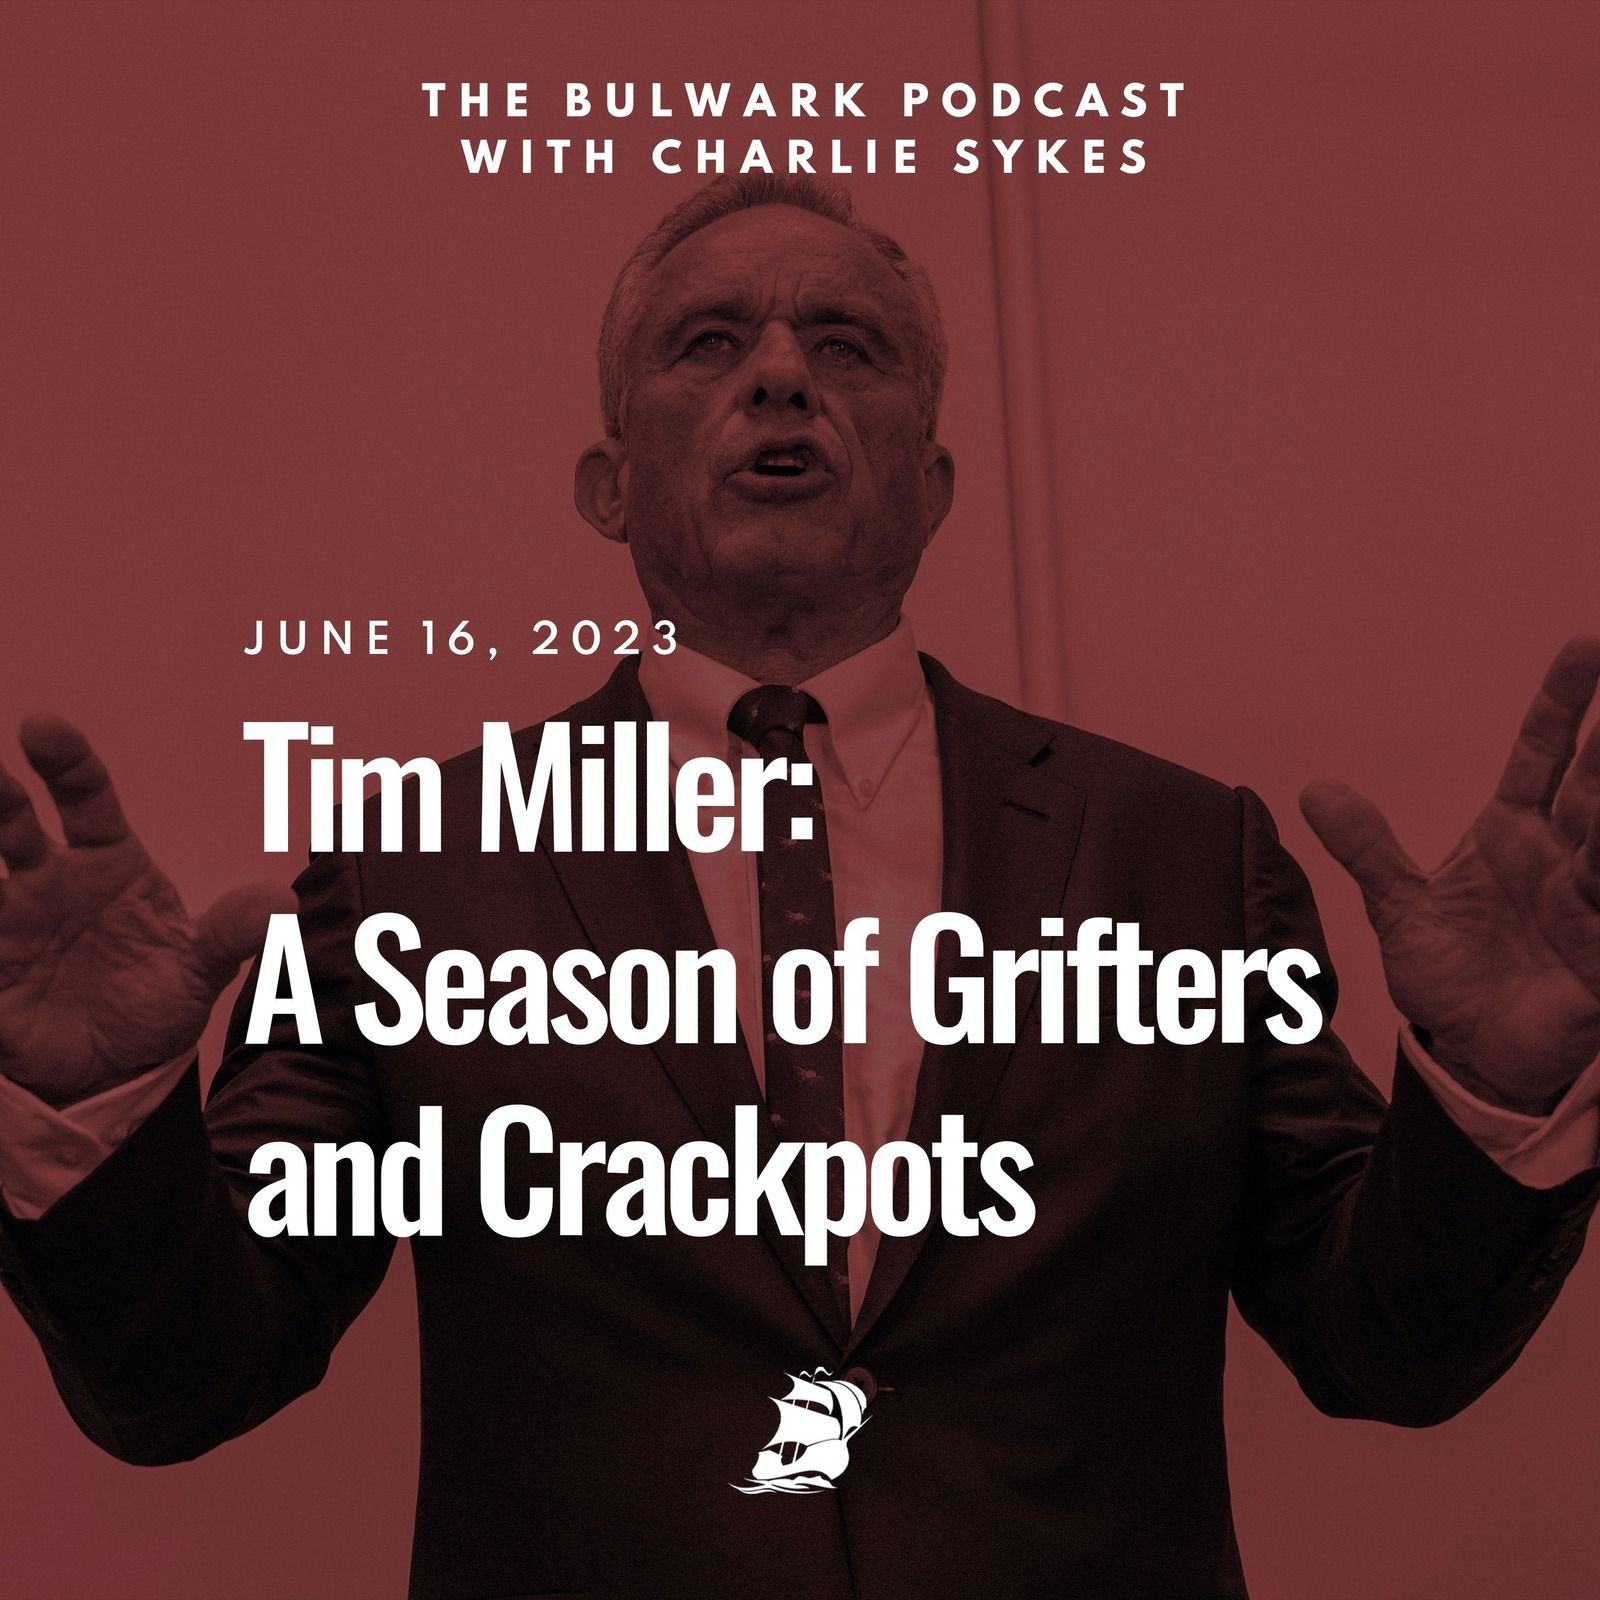 Tim Miller: A Season of Grifters and Crackpots by The Bulwark Podcast